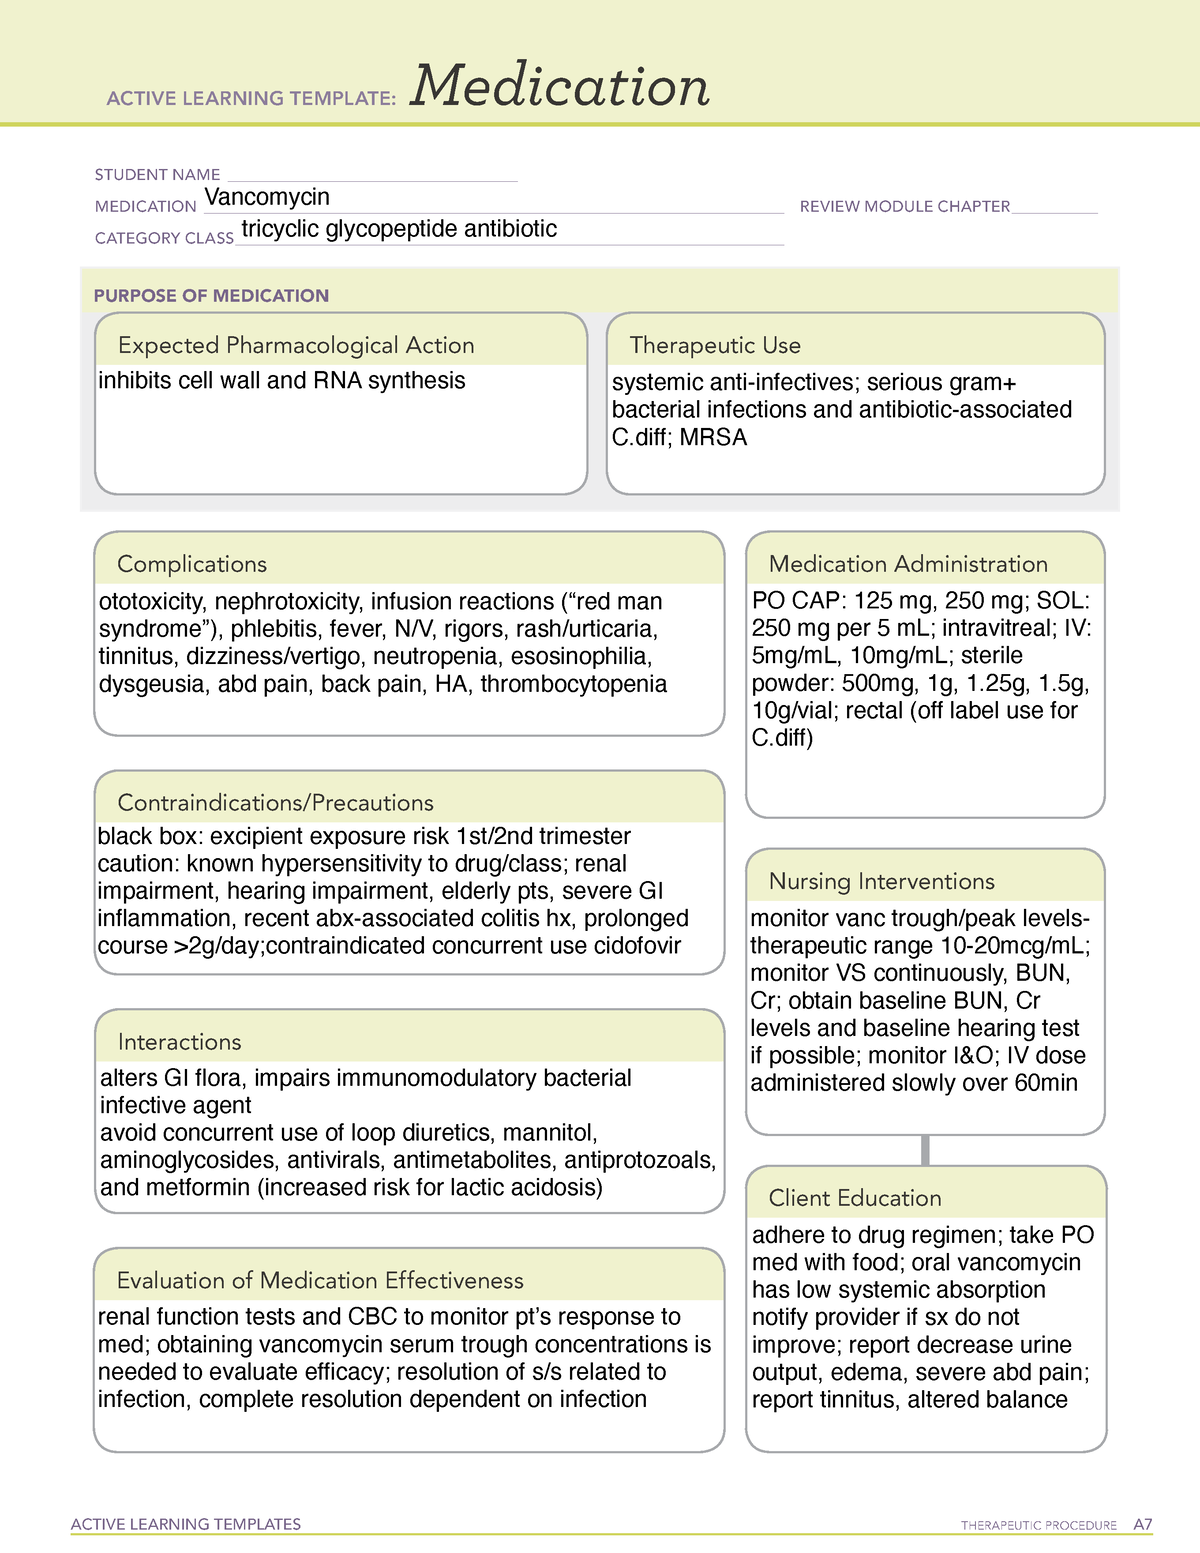 Active Learning Template Medication Vancomycin ACTIVE LEARNING